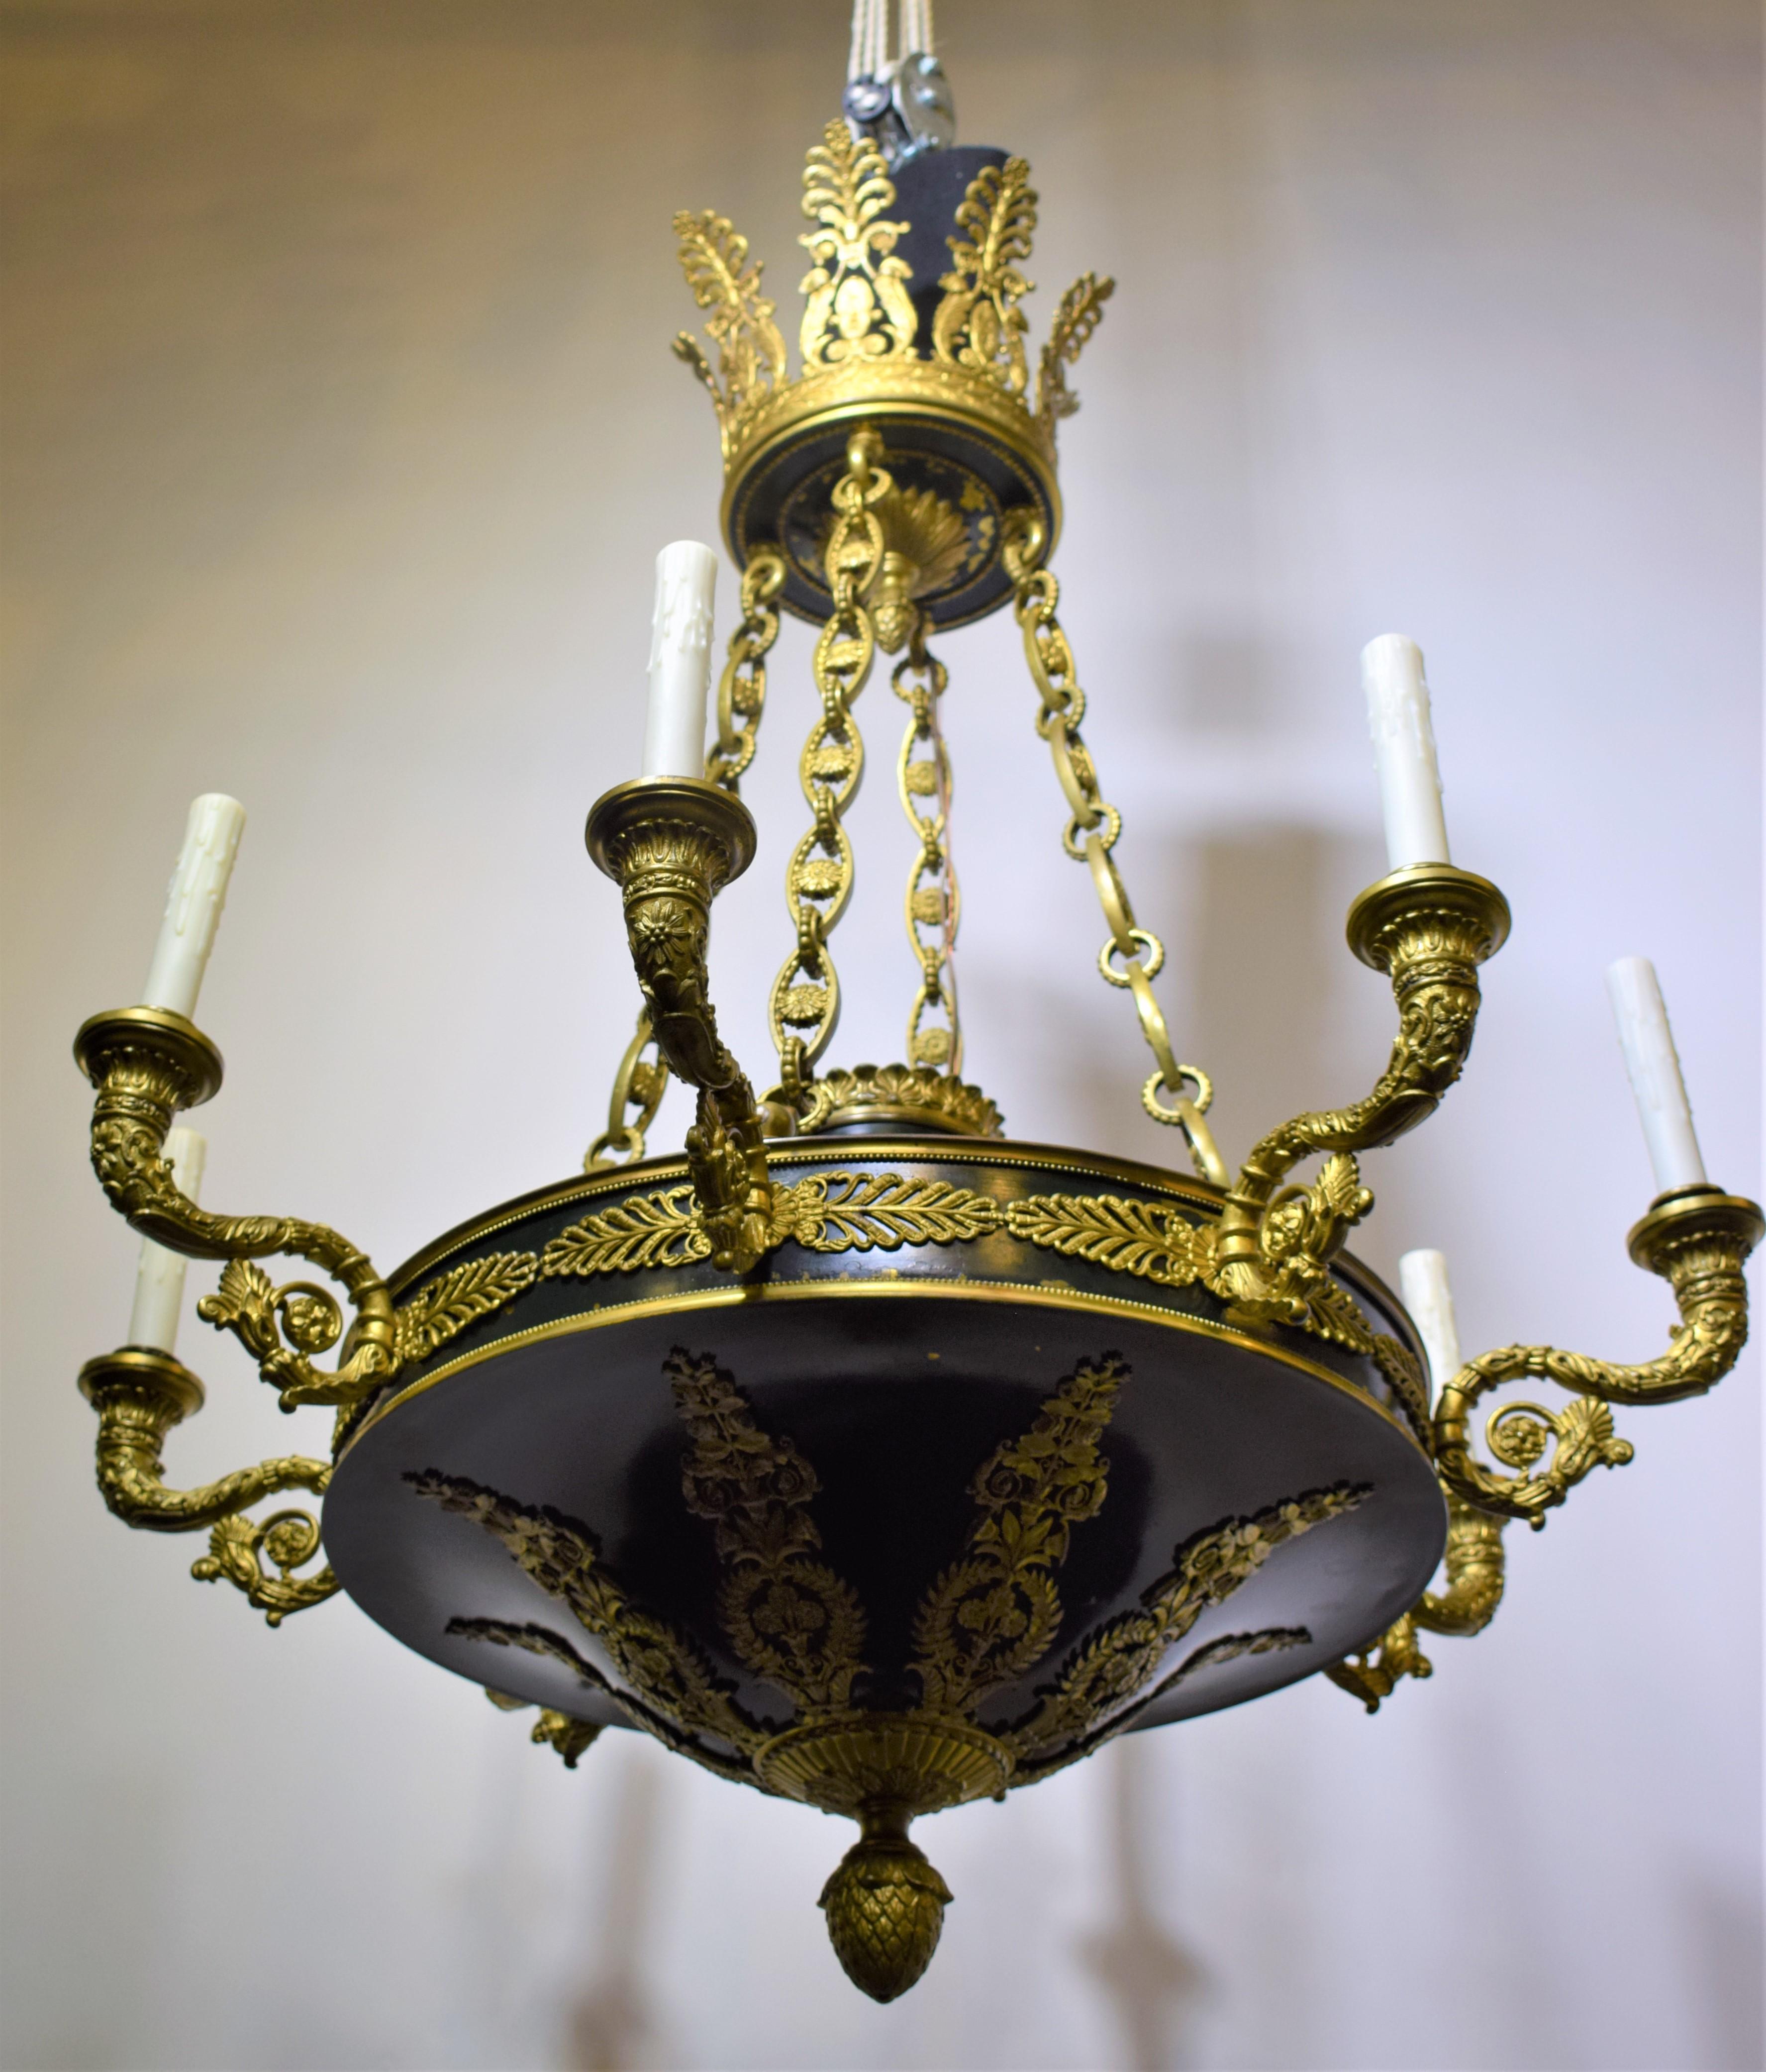 A very important Empire style chandelier. Gilt bronze & patinated bronze. Exquisite Detail. Unusually large size. France, circa 1920.
Measures: Height 48